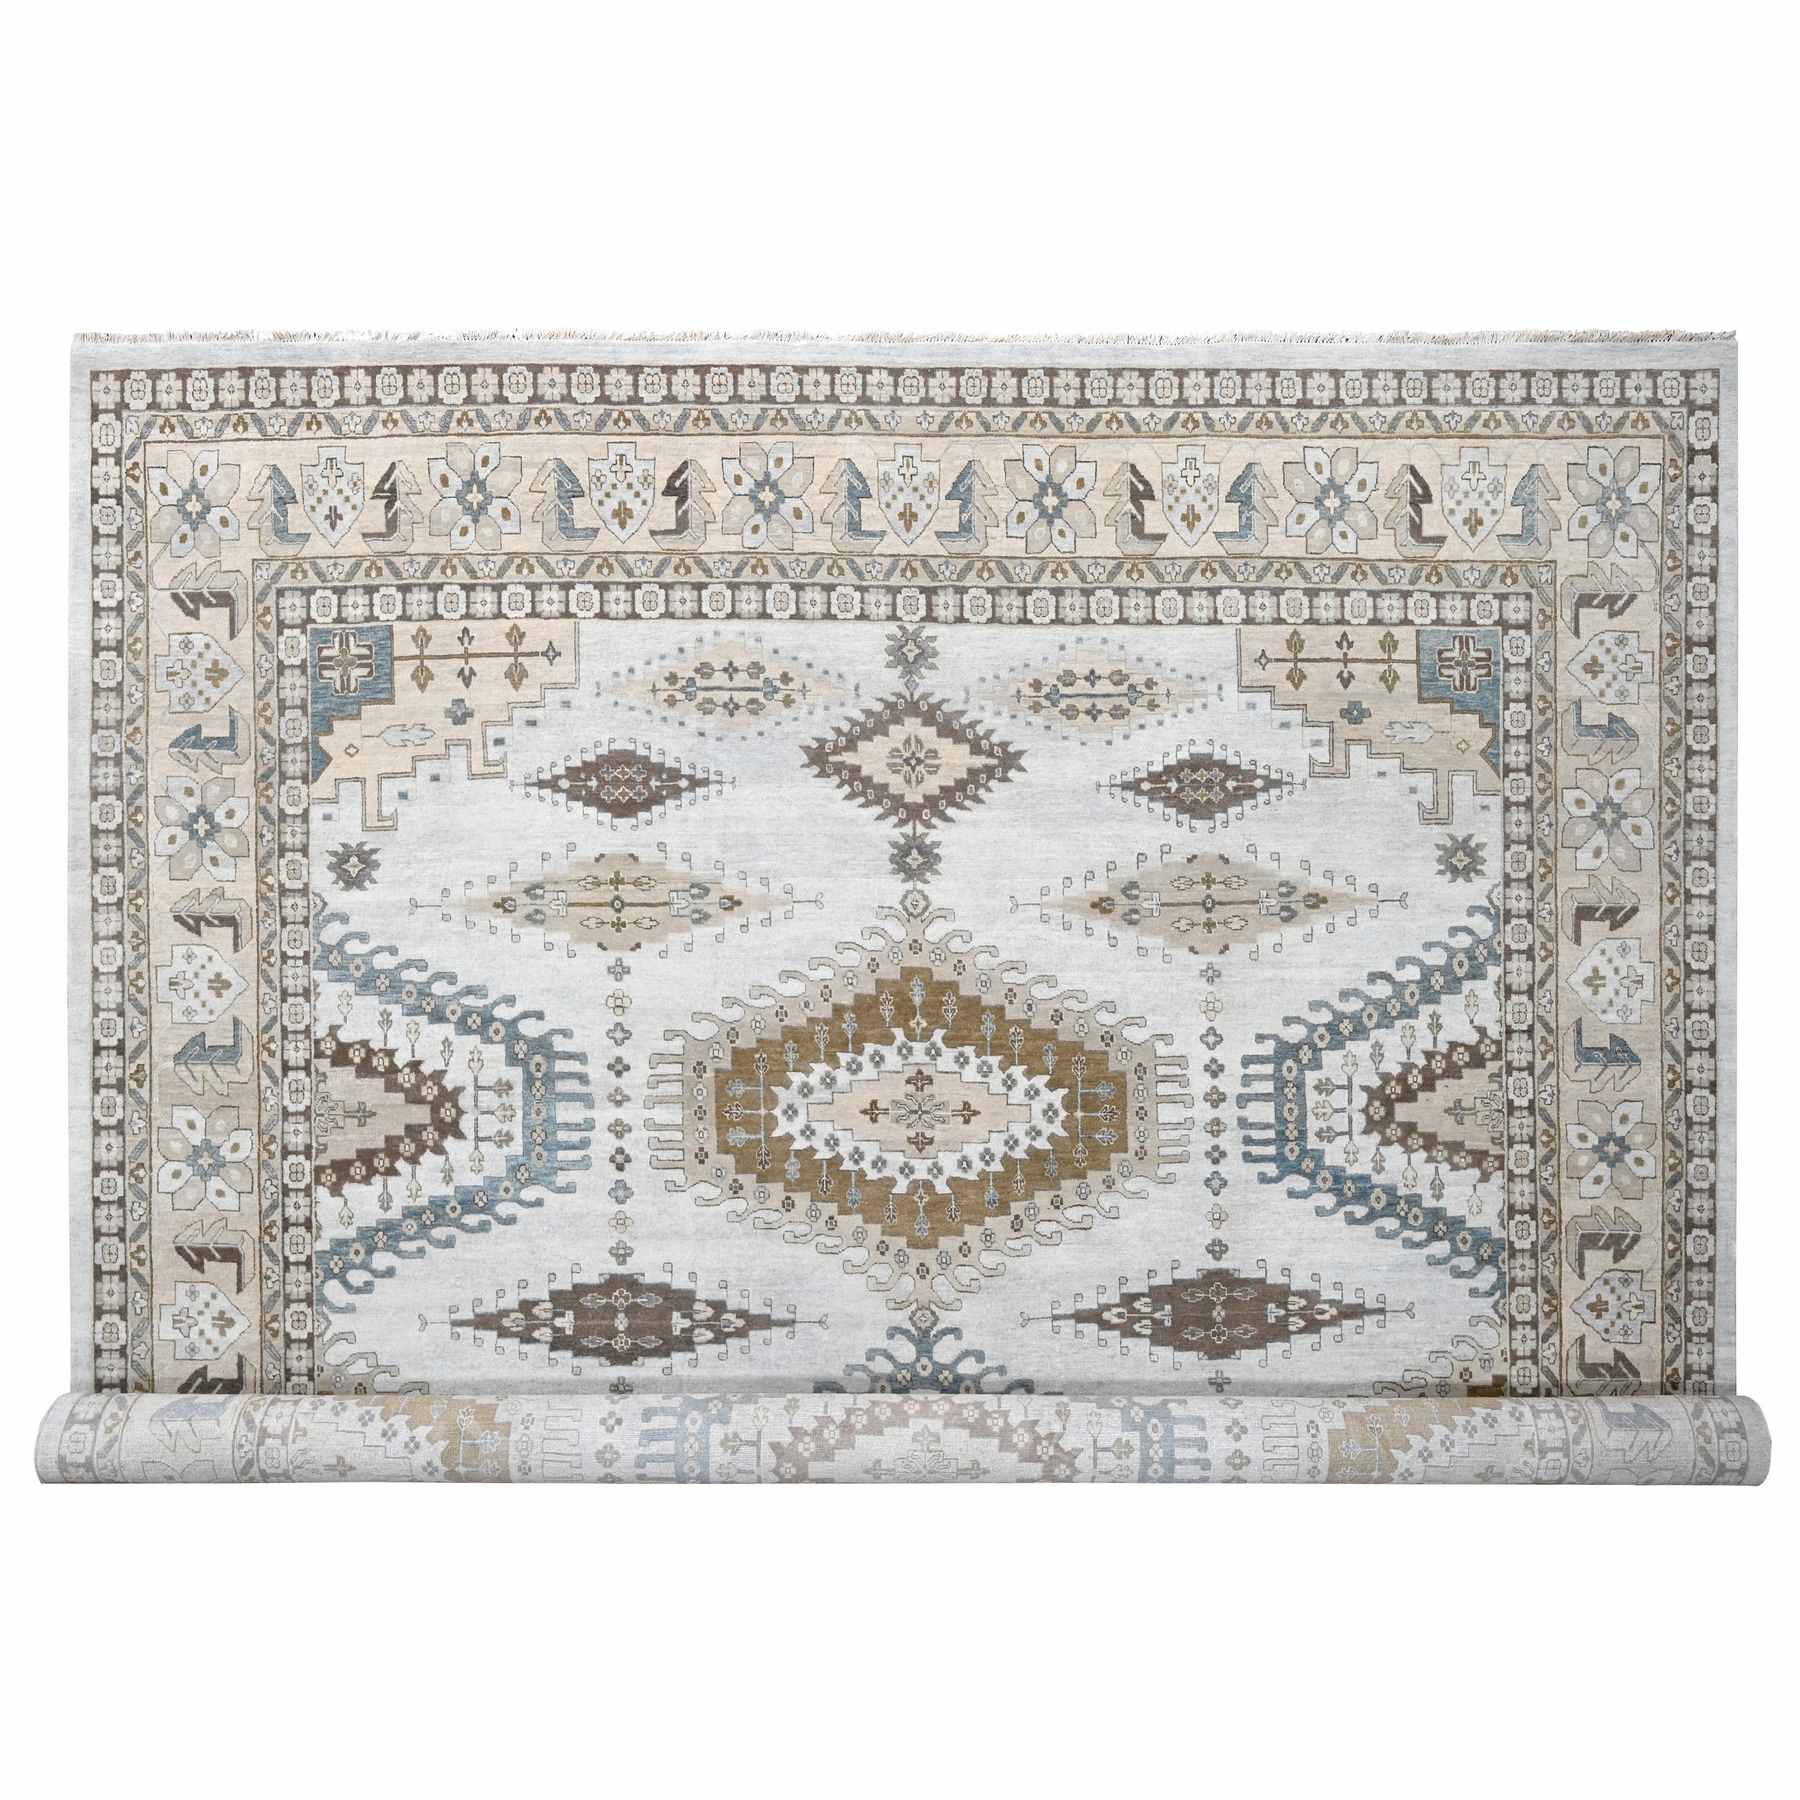 BoothBay Gray and Oyster White, Natural Dyes, Densely Woven, Organic Wool, Hand Knotted Persian Village Inspired Geometric Medallions, Square Oriental Rug